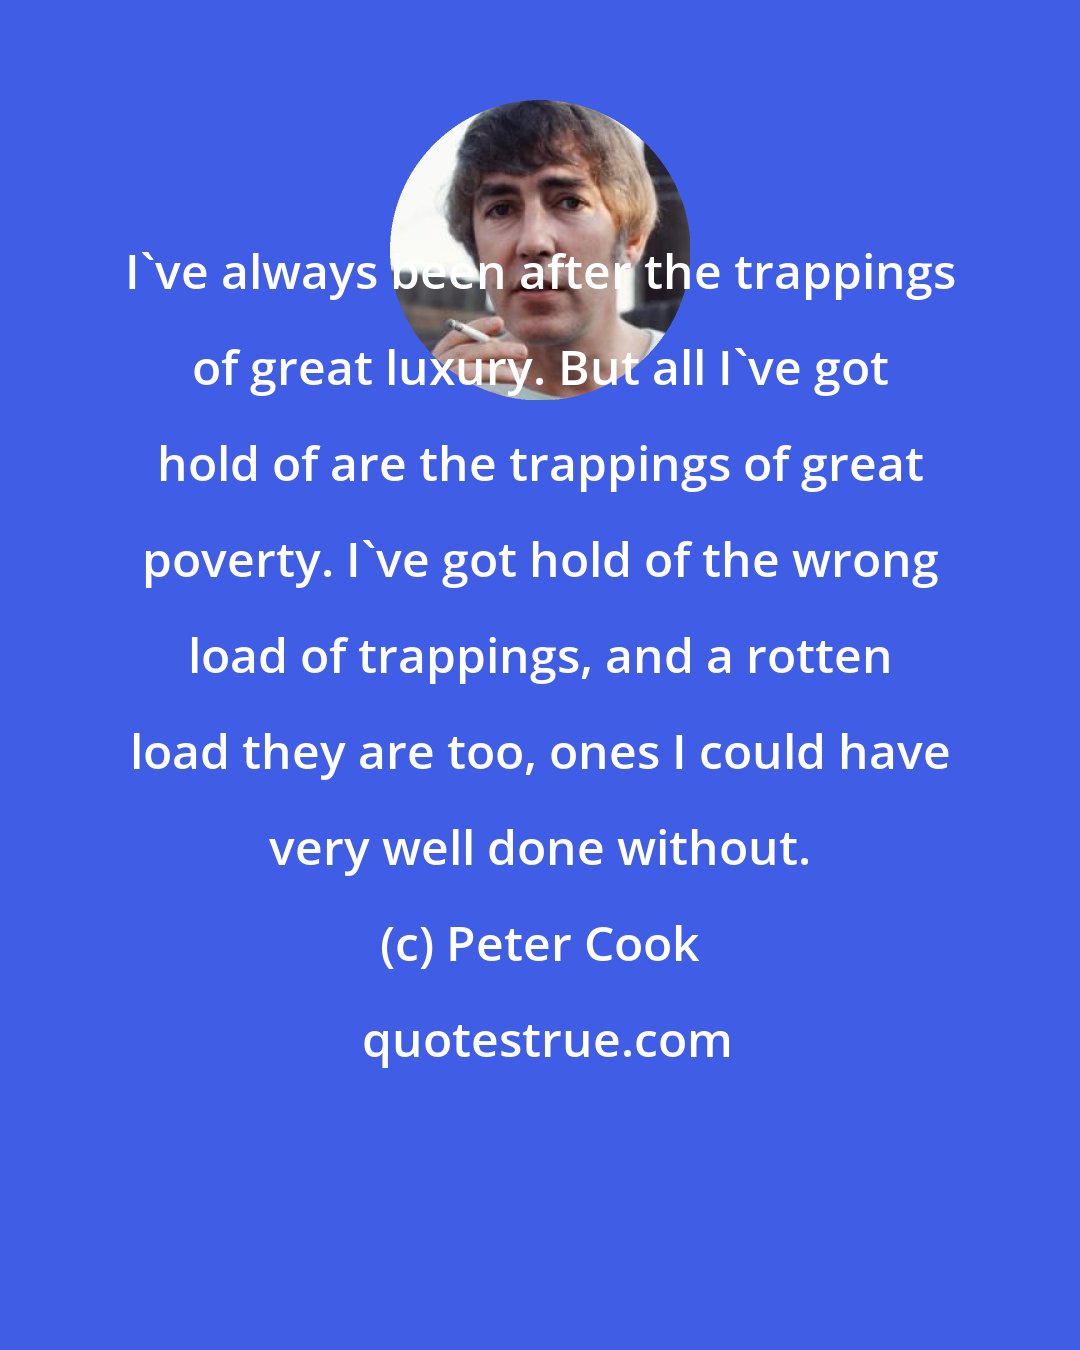 Peter Cook: I've always been after the trappings of great luxury. But all I've got hold of are the trappings of great poverty. I've got hold of the wrong load of trappings, and a rotten load they are too, ones I could have very well done without.